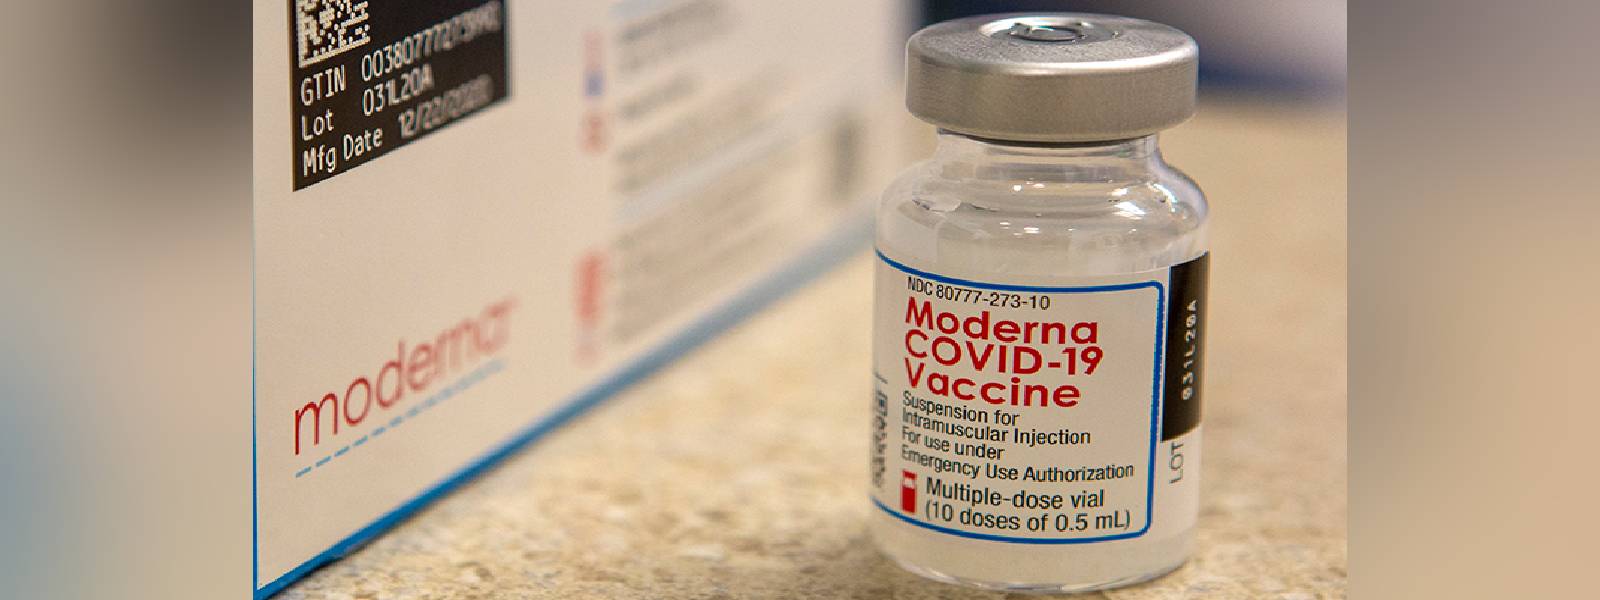 DGHS guidelines on MODERNA jab to be issued soon